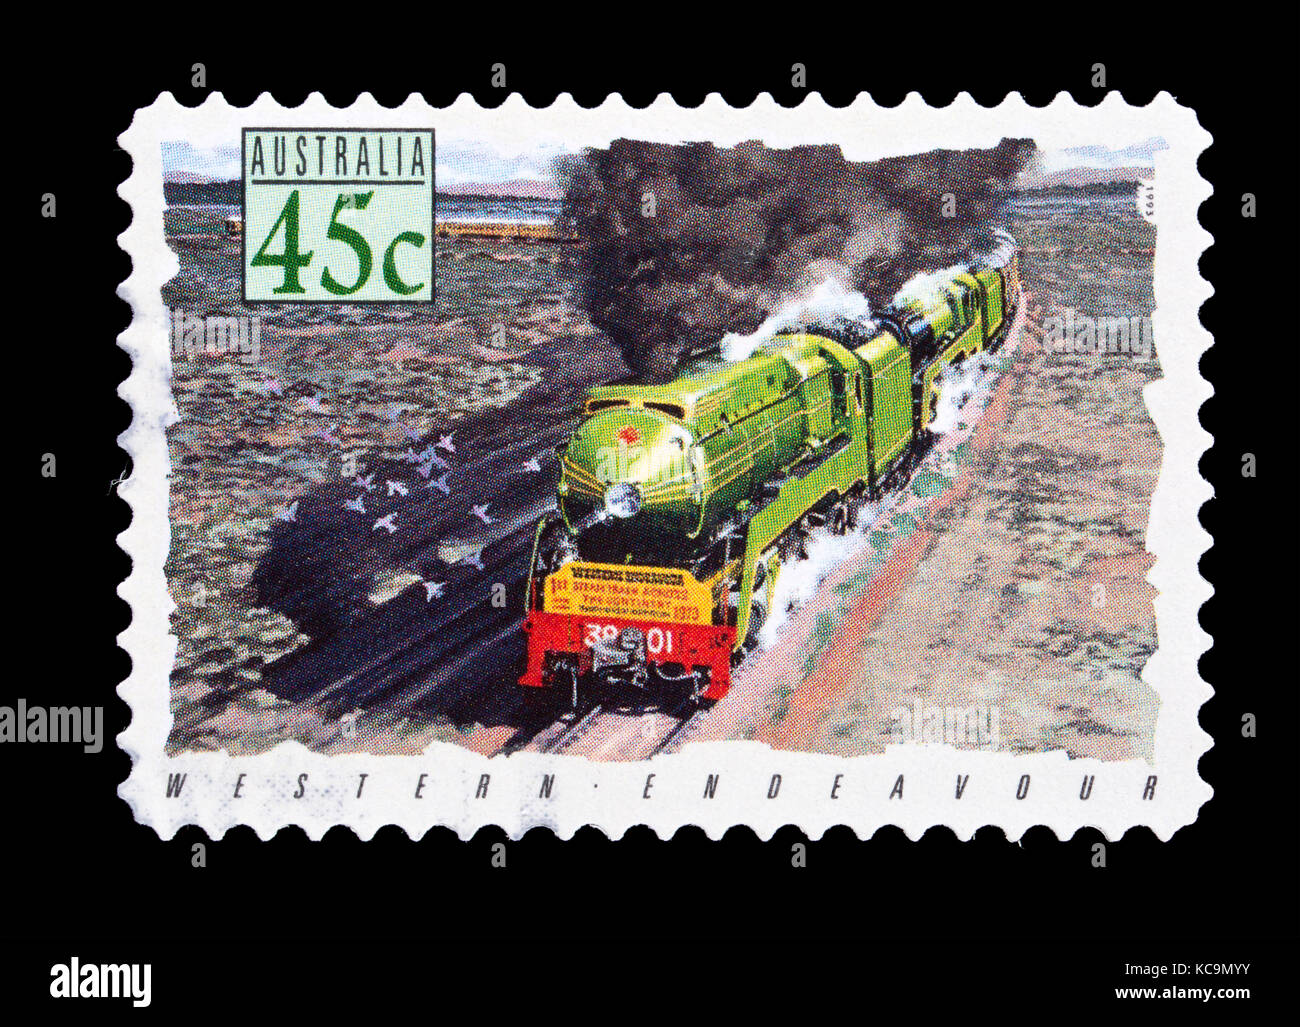 Postage stamp From Australia depicting the steam train Western Endeavor Stock Photo